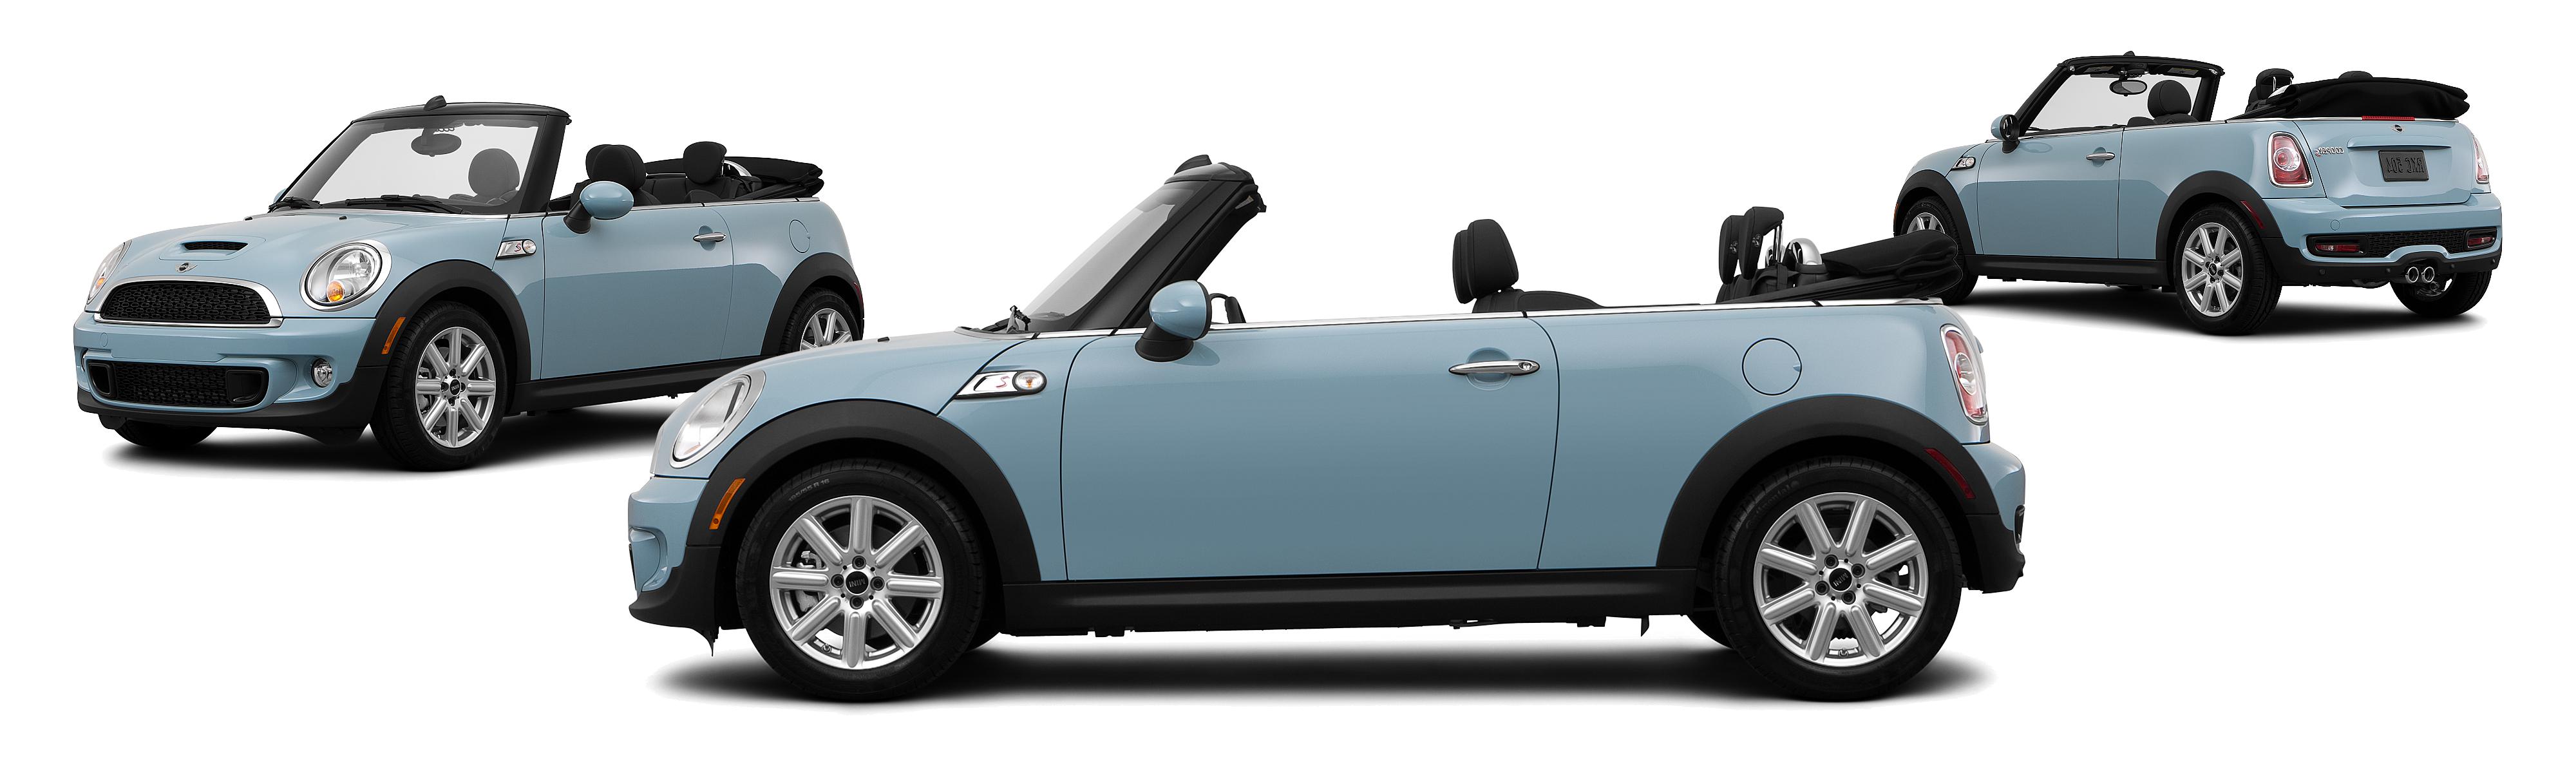 2014 MINI Convertible Cooper S 2dr Convertible - Research - GrooveCar